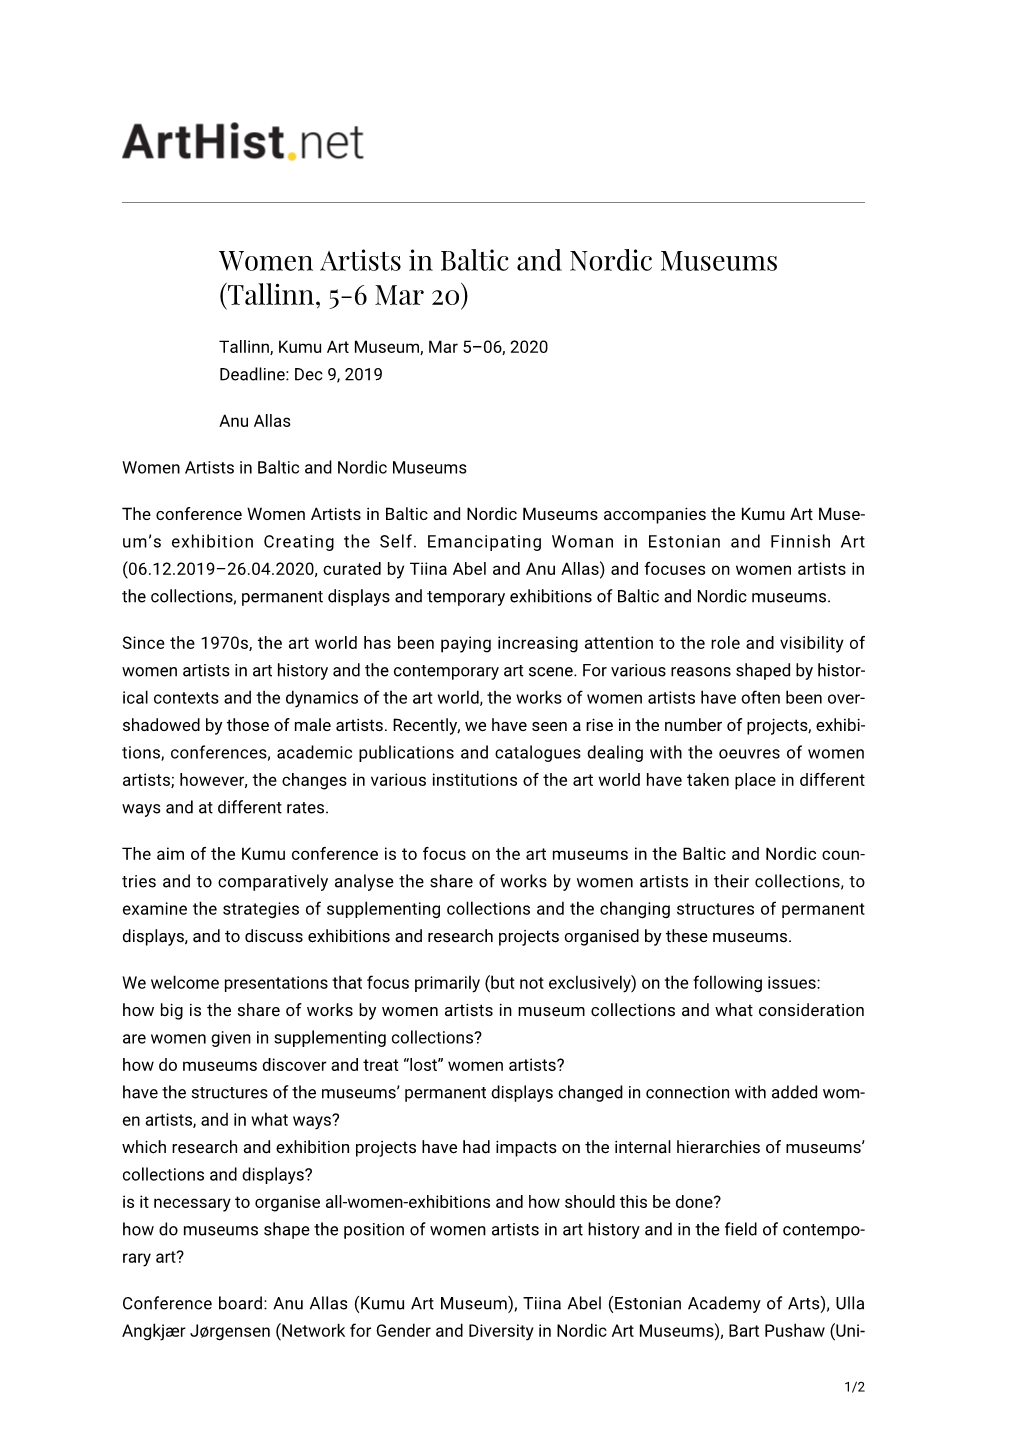 Women Artists in Baltic and Nordic Museums (Tallinn, 5-6 Mar 20)